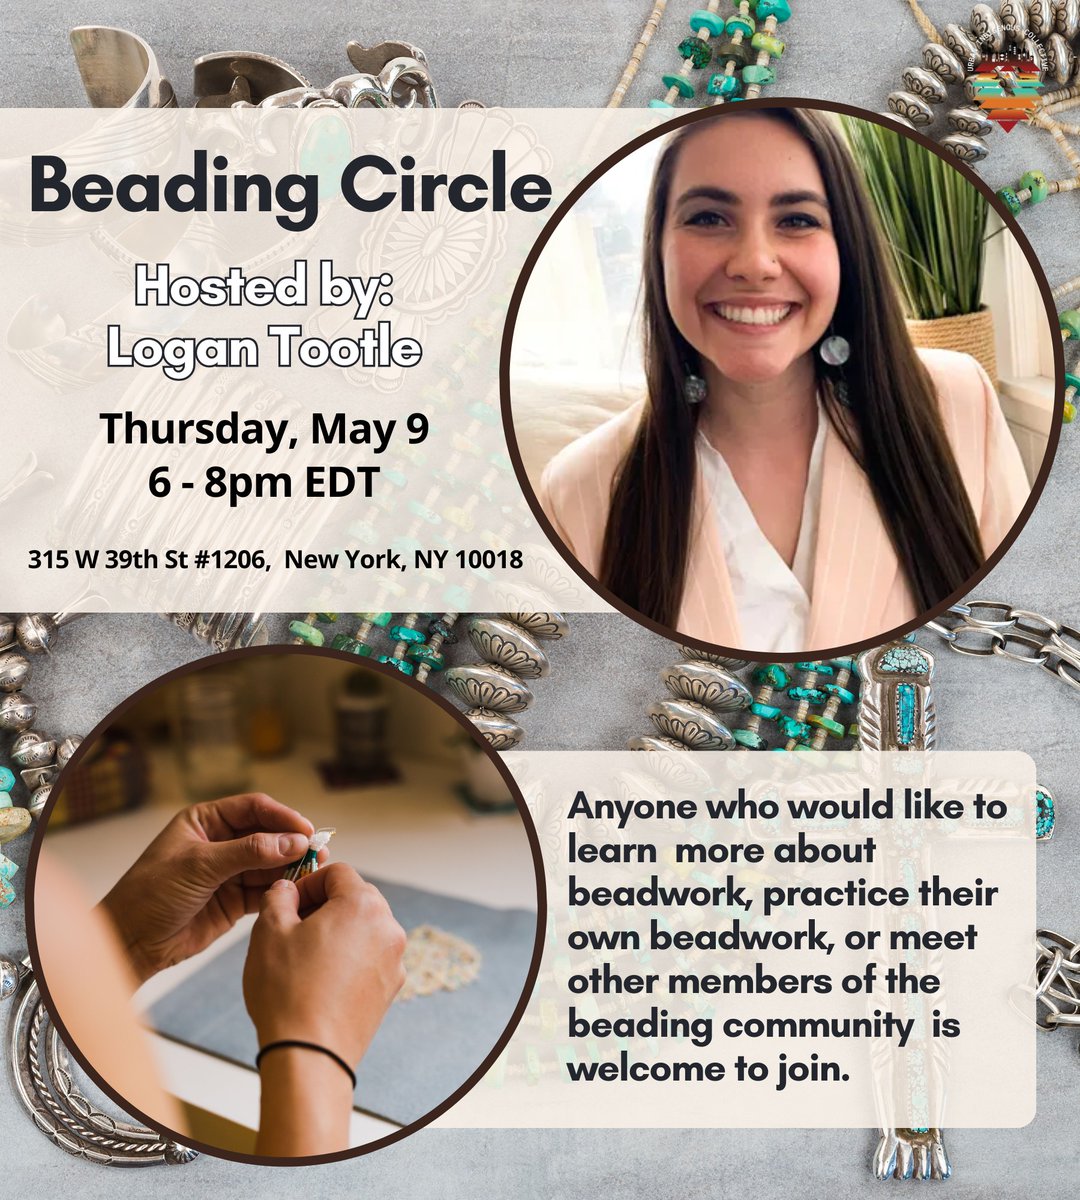 Join us on May 9th from 6 pm to 8 pm at our community Beading Circle hosted by Logan Tootle! Tickets are free for all Indigenous-identifying people. For non-indigenous allies, we ask for a donation of $15 donation + the ticketing fee. Link in LinkTree to register!